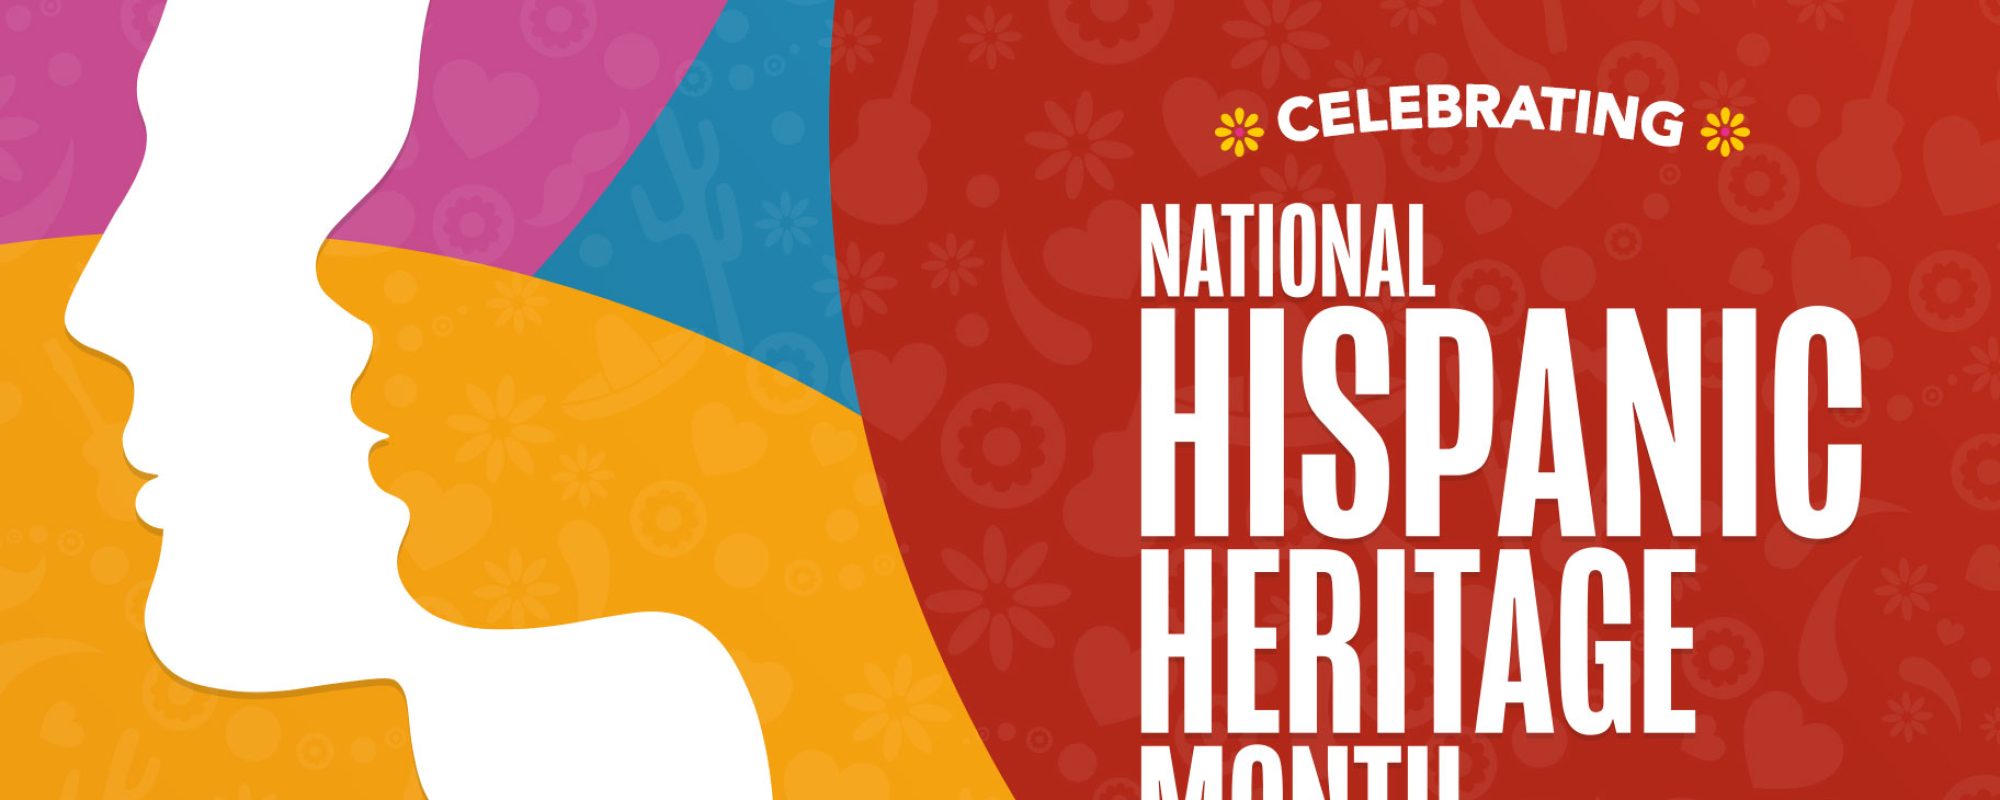 OVATION TV’S ARTHOUSE CELEBRATES NATIONAL HISPANIC HERITAGE MONTH WITH A CURATED ON-DEMAND LINEUP